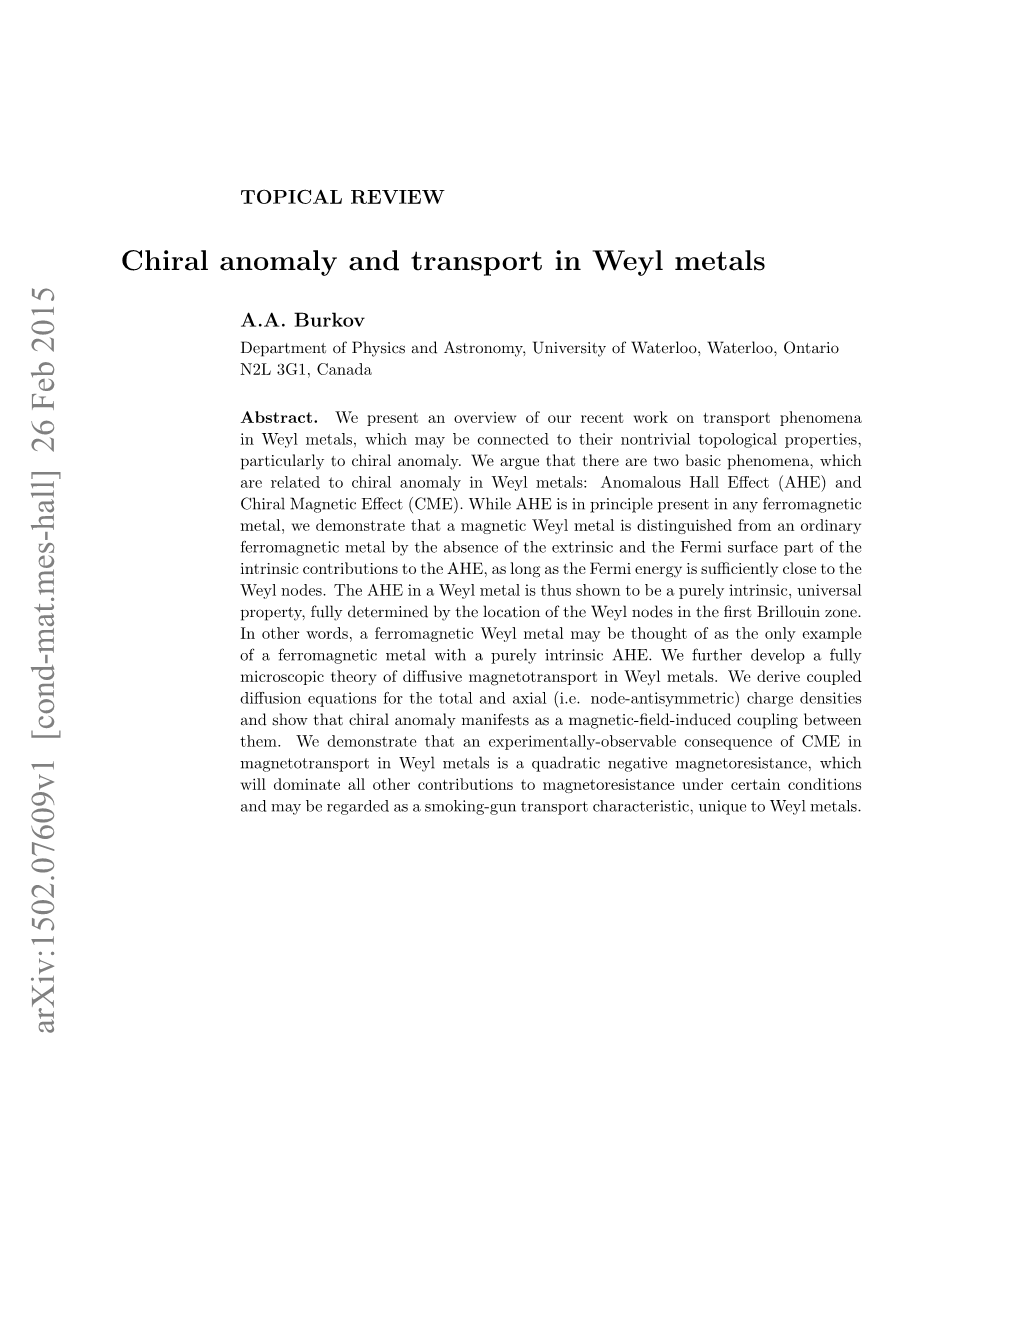 Chiral Anomaly and Transport in Weyl Metals